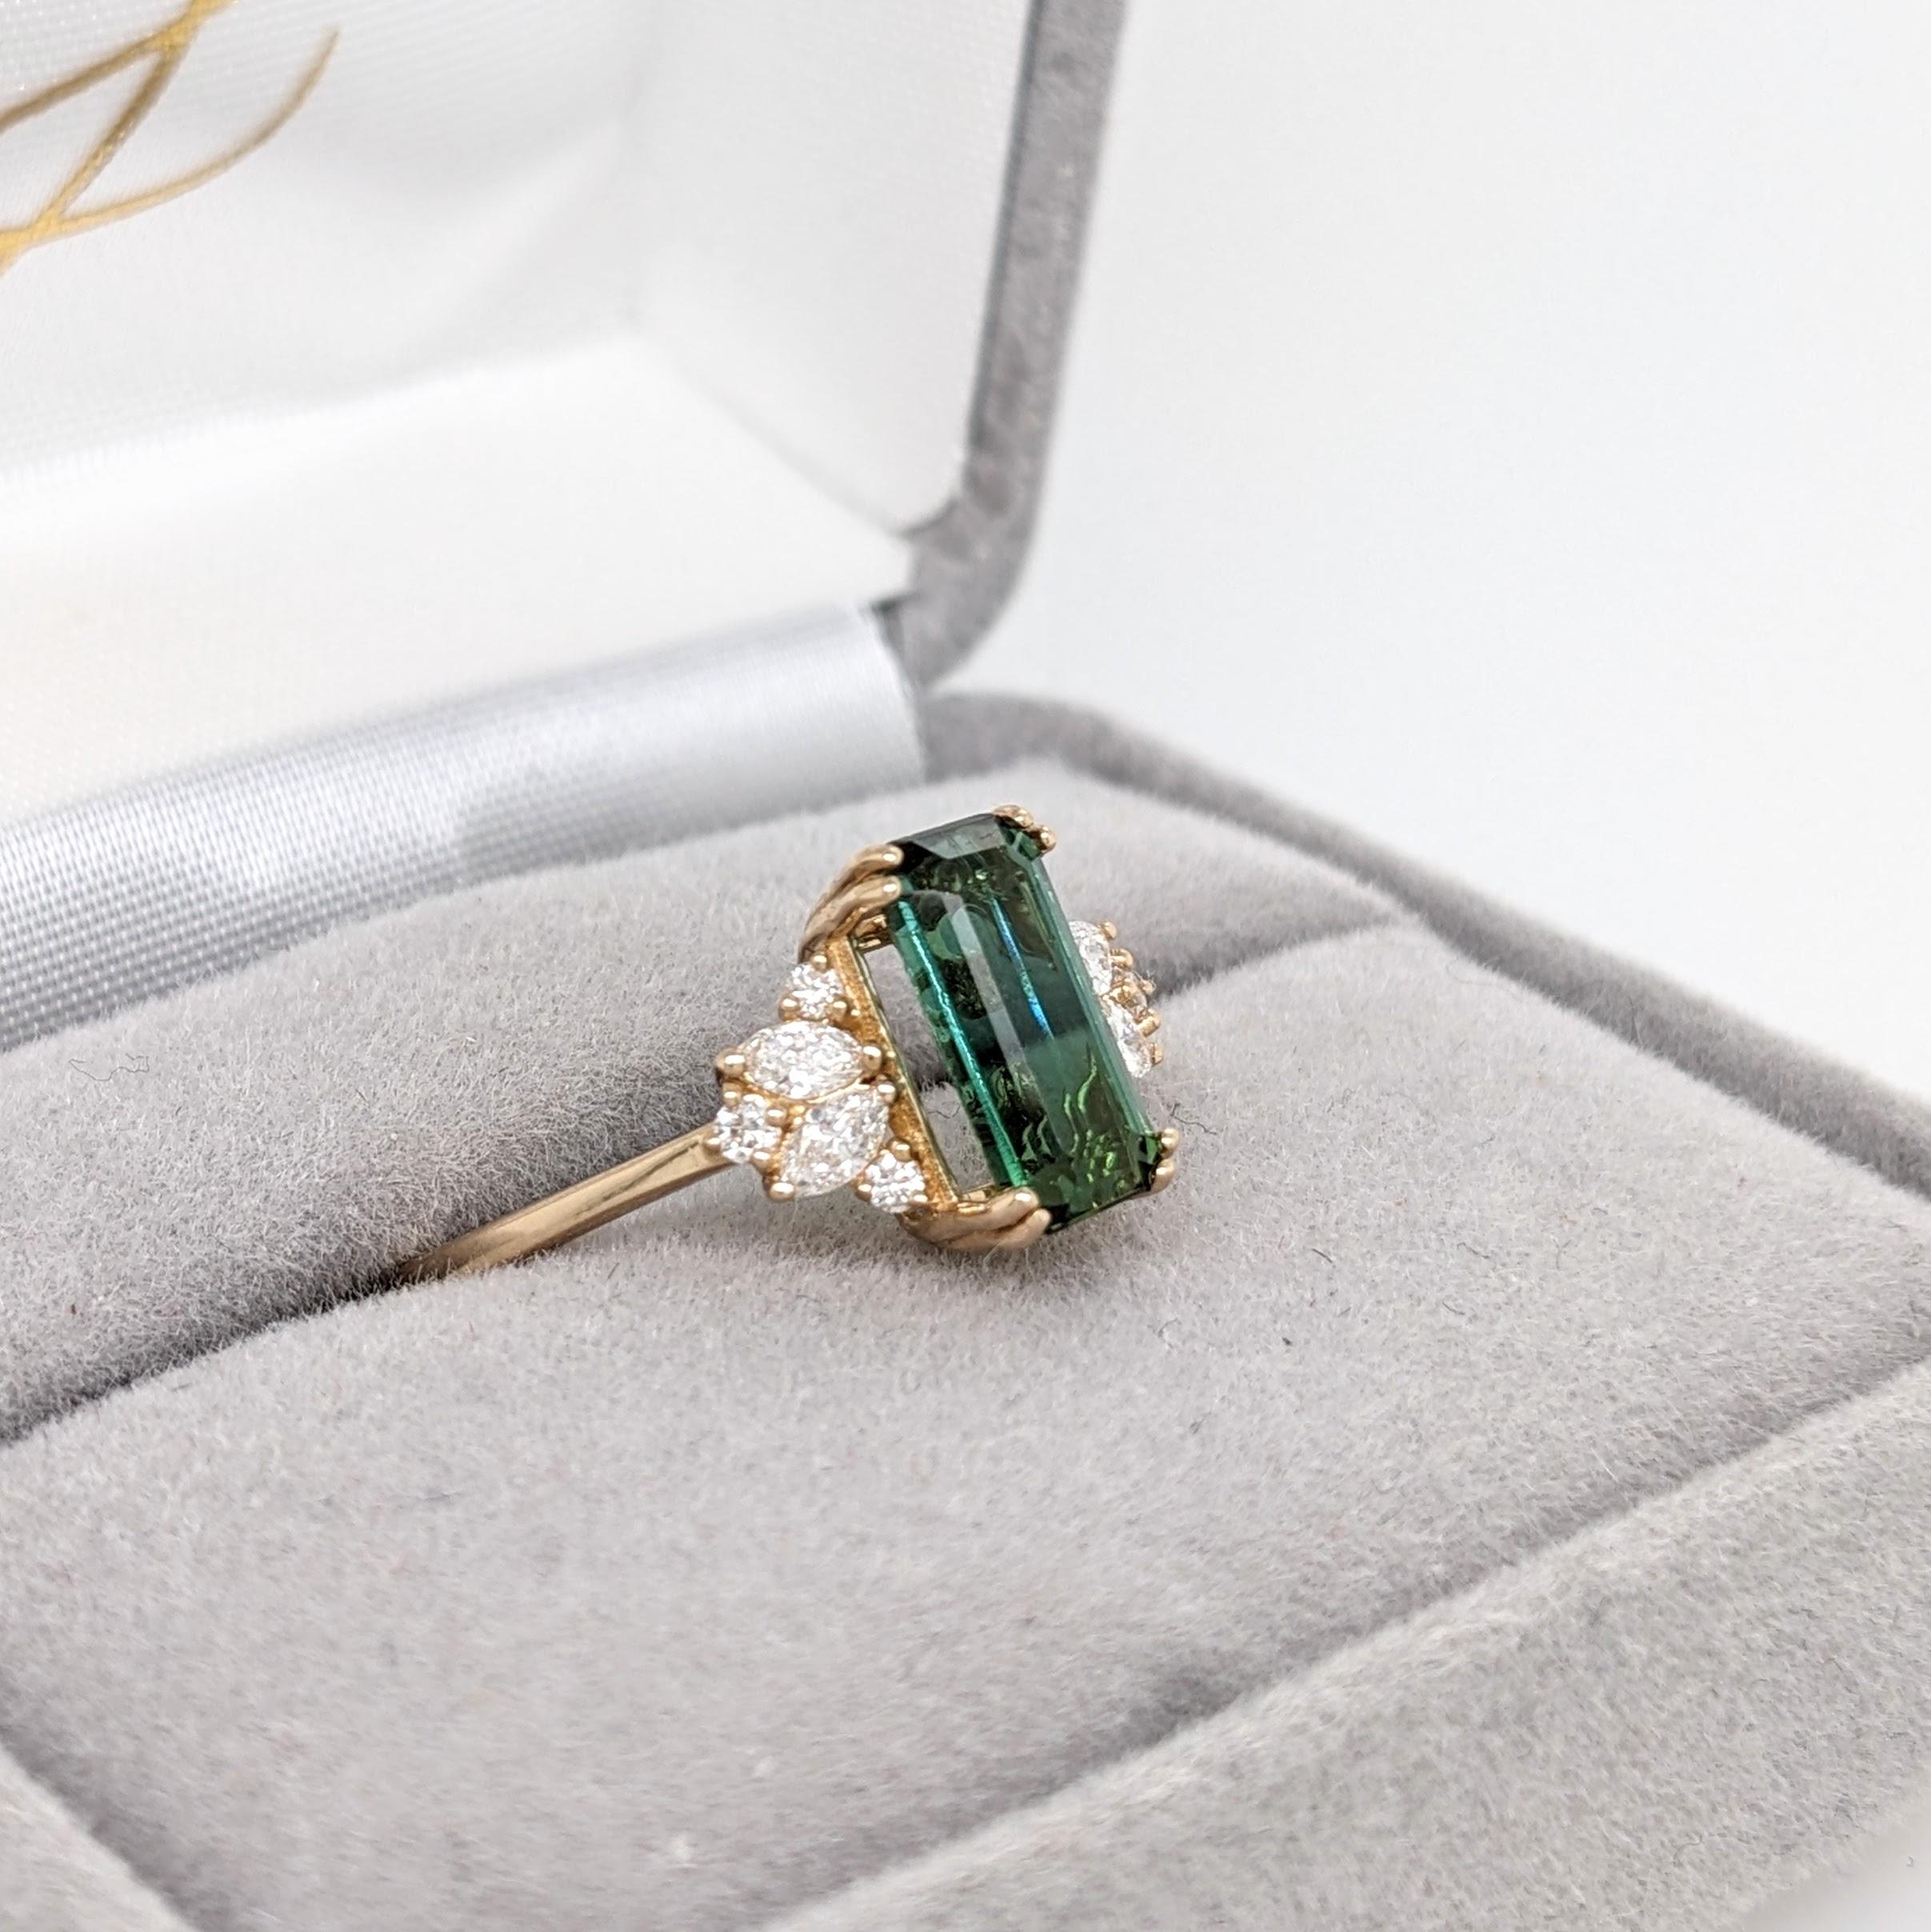 1.51ct Tourmaline w Diamond Accents in 14k Solid Yellow Gold Emerald Cut 10x4mm For Sale 4